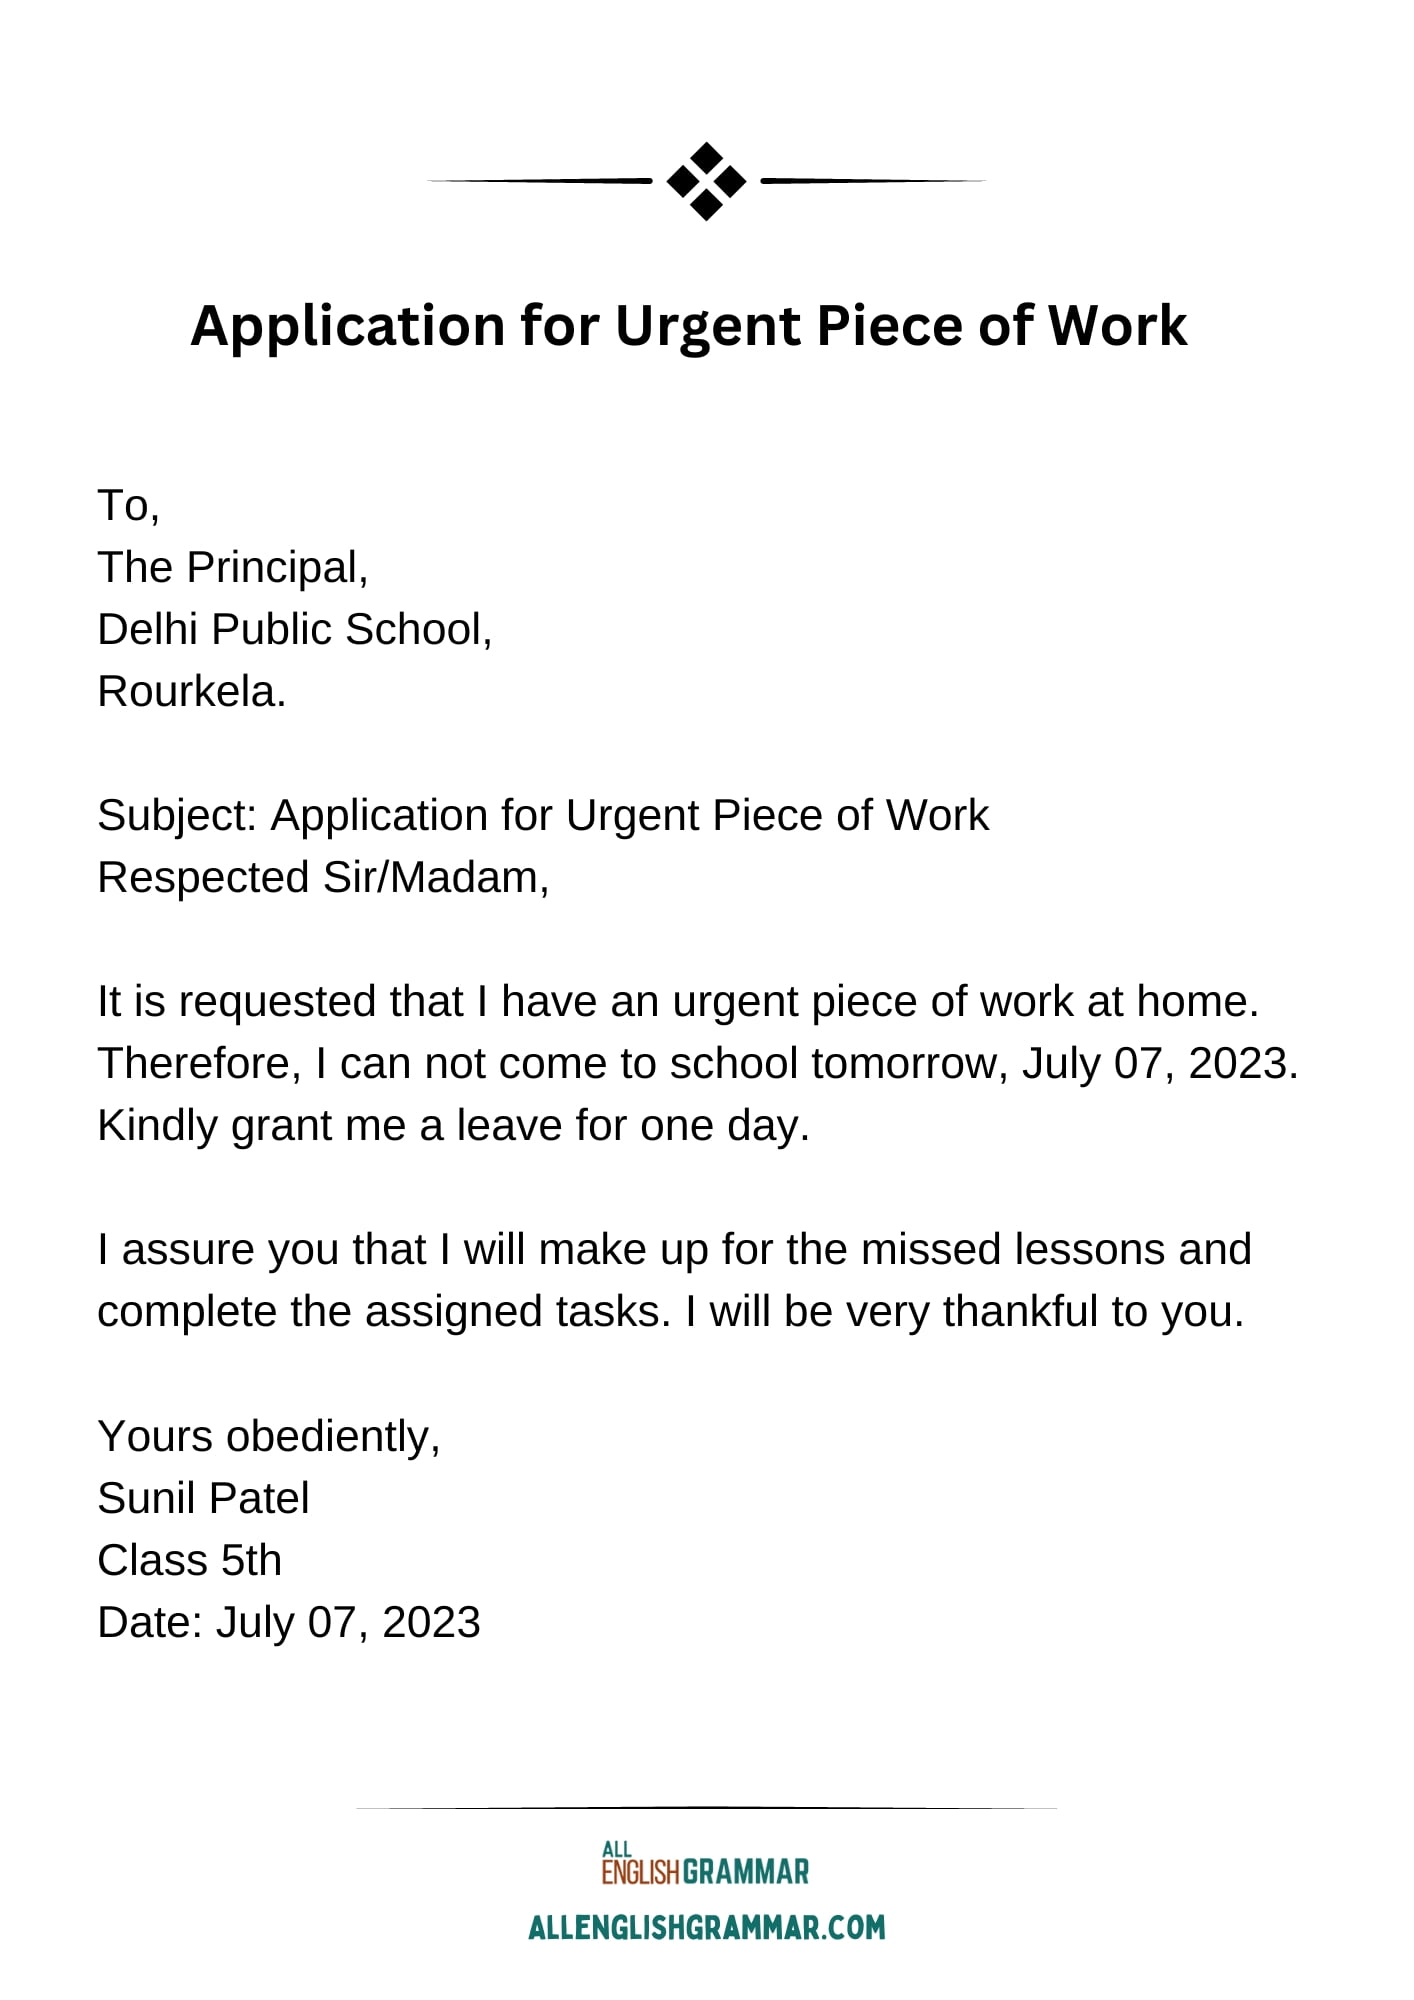 Application for Urgent Piece of Work at home